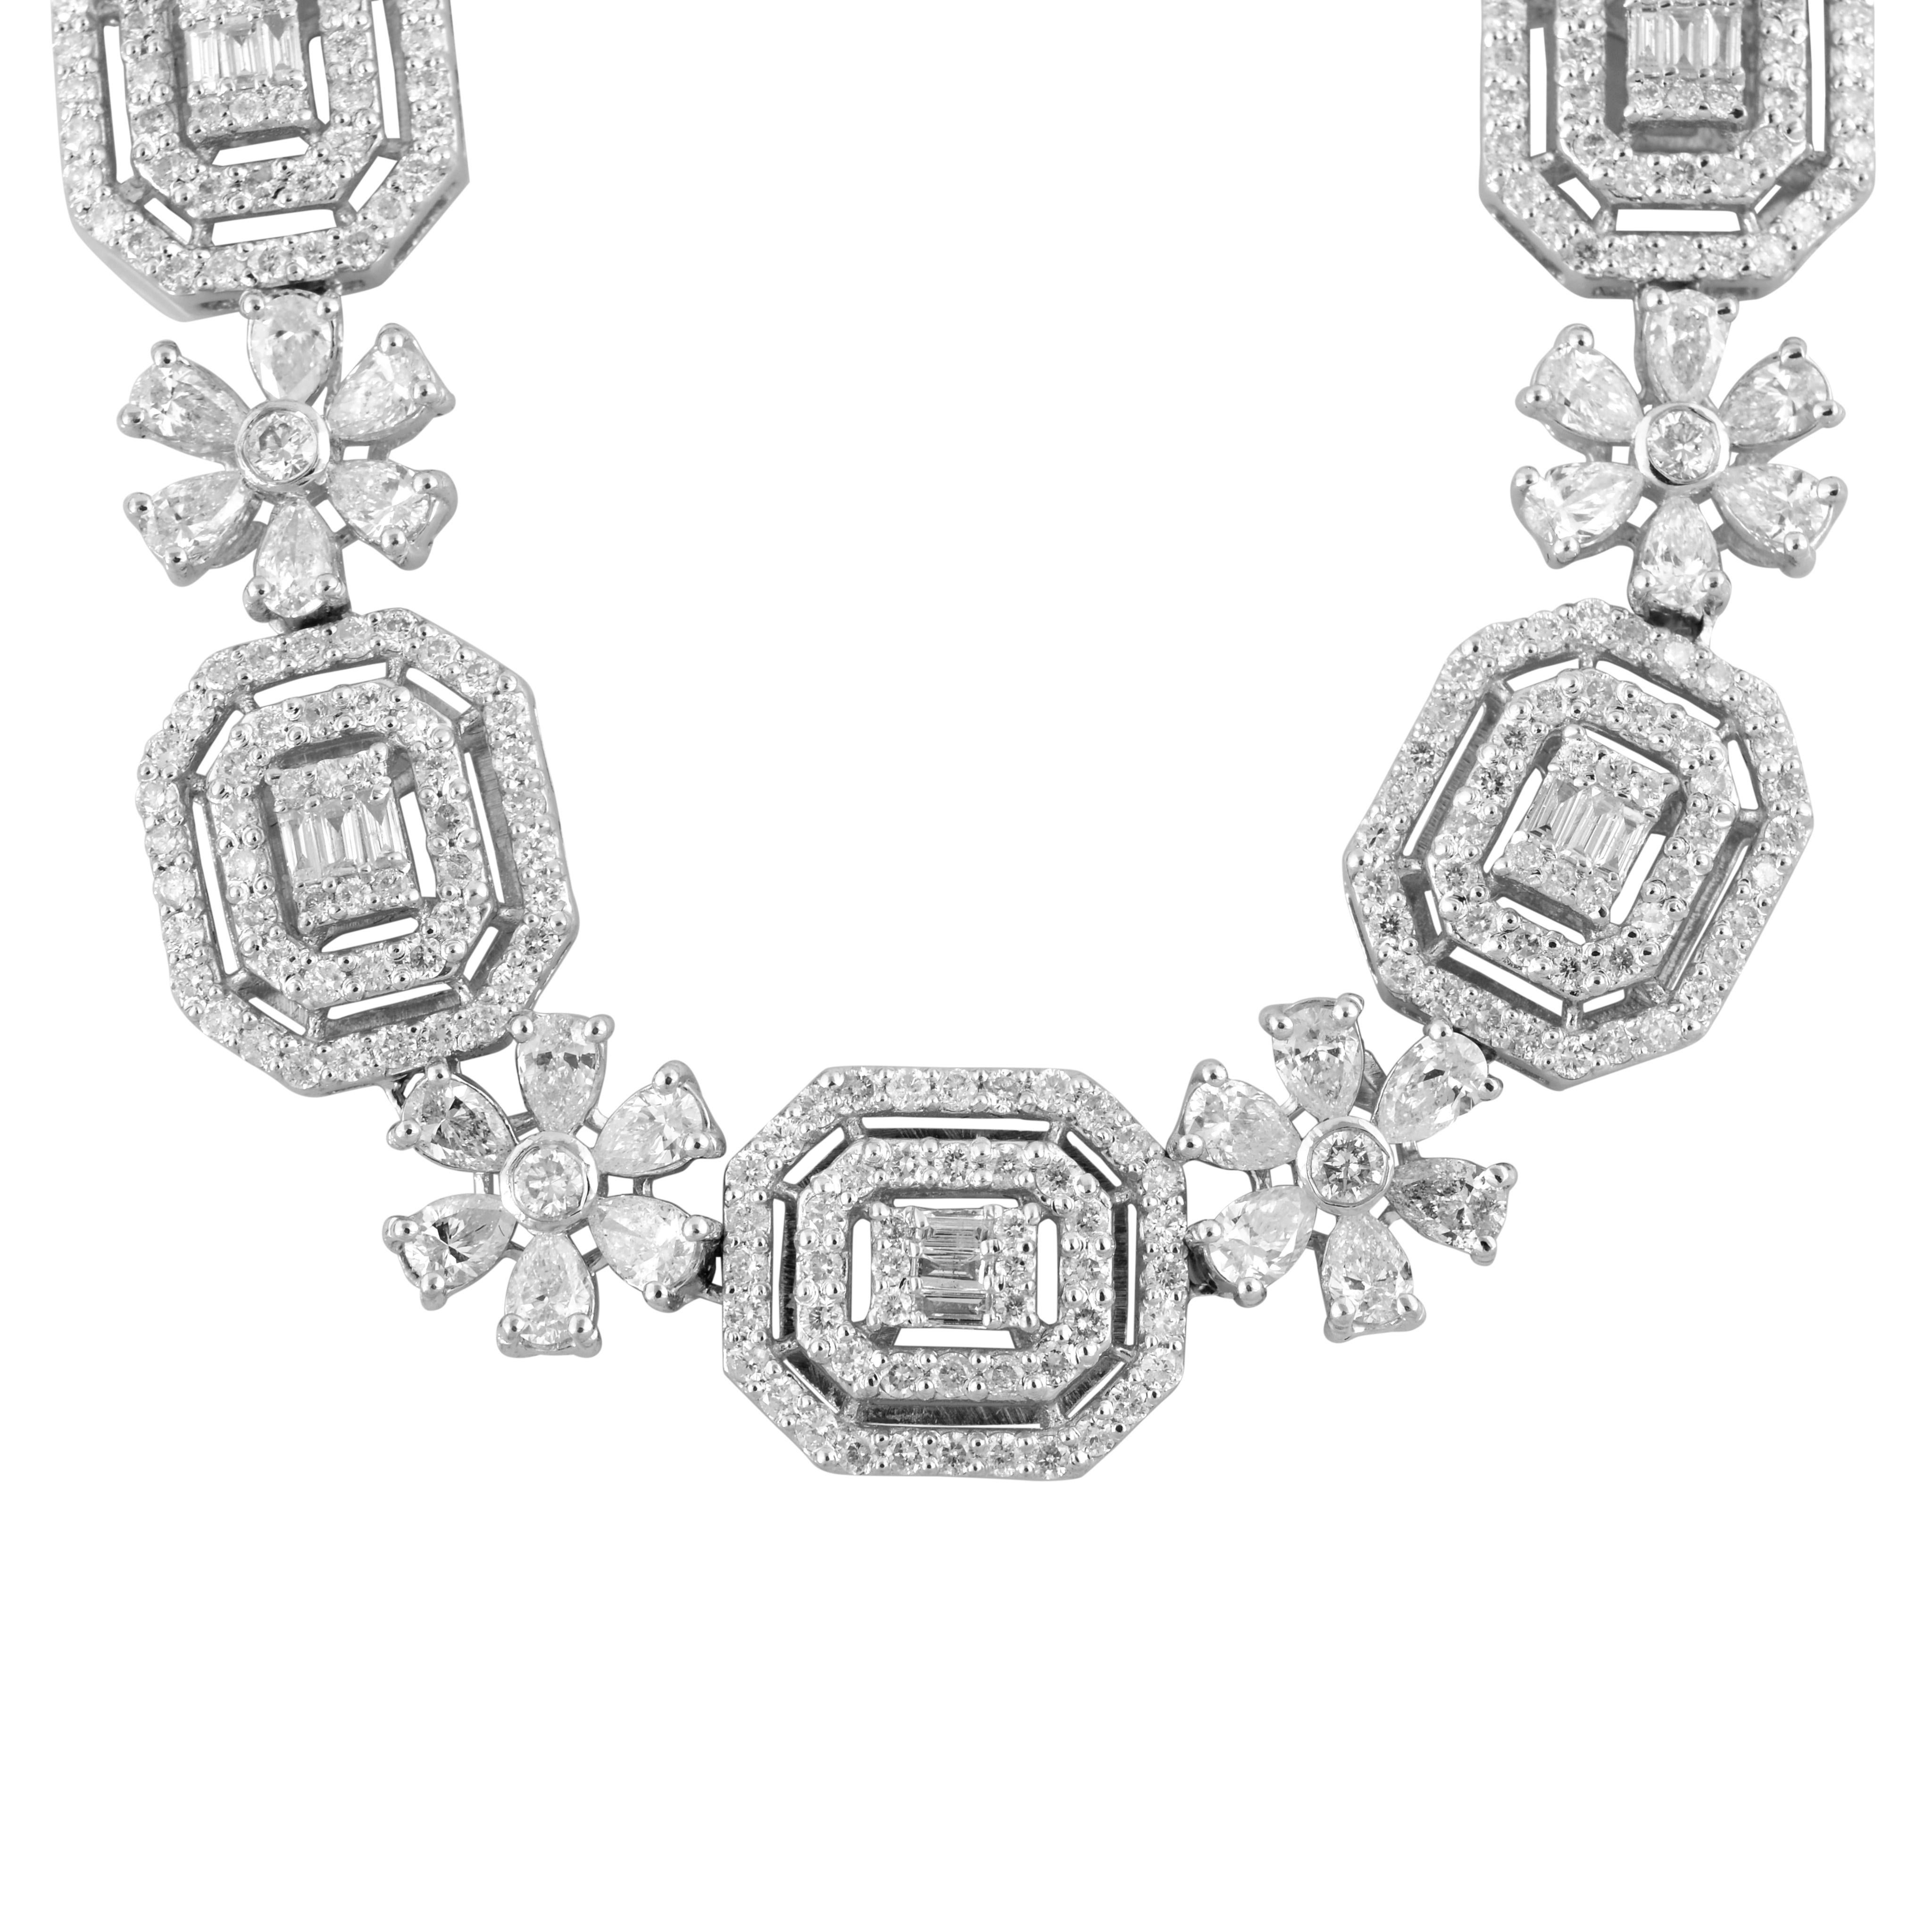 Introducing our handmade jewelry masterpiece: a natural 11.20-carat diamond charm necklace, made in 18-karat white gold.
The focal point of this necklace is an impressive collection of diamonds, carefully selected for their exceptional quality and